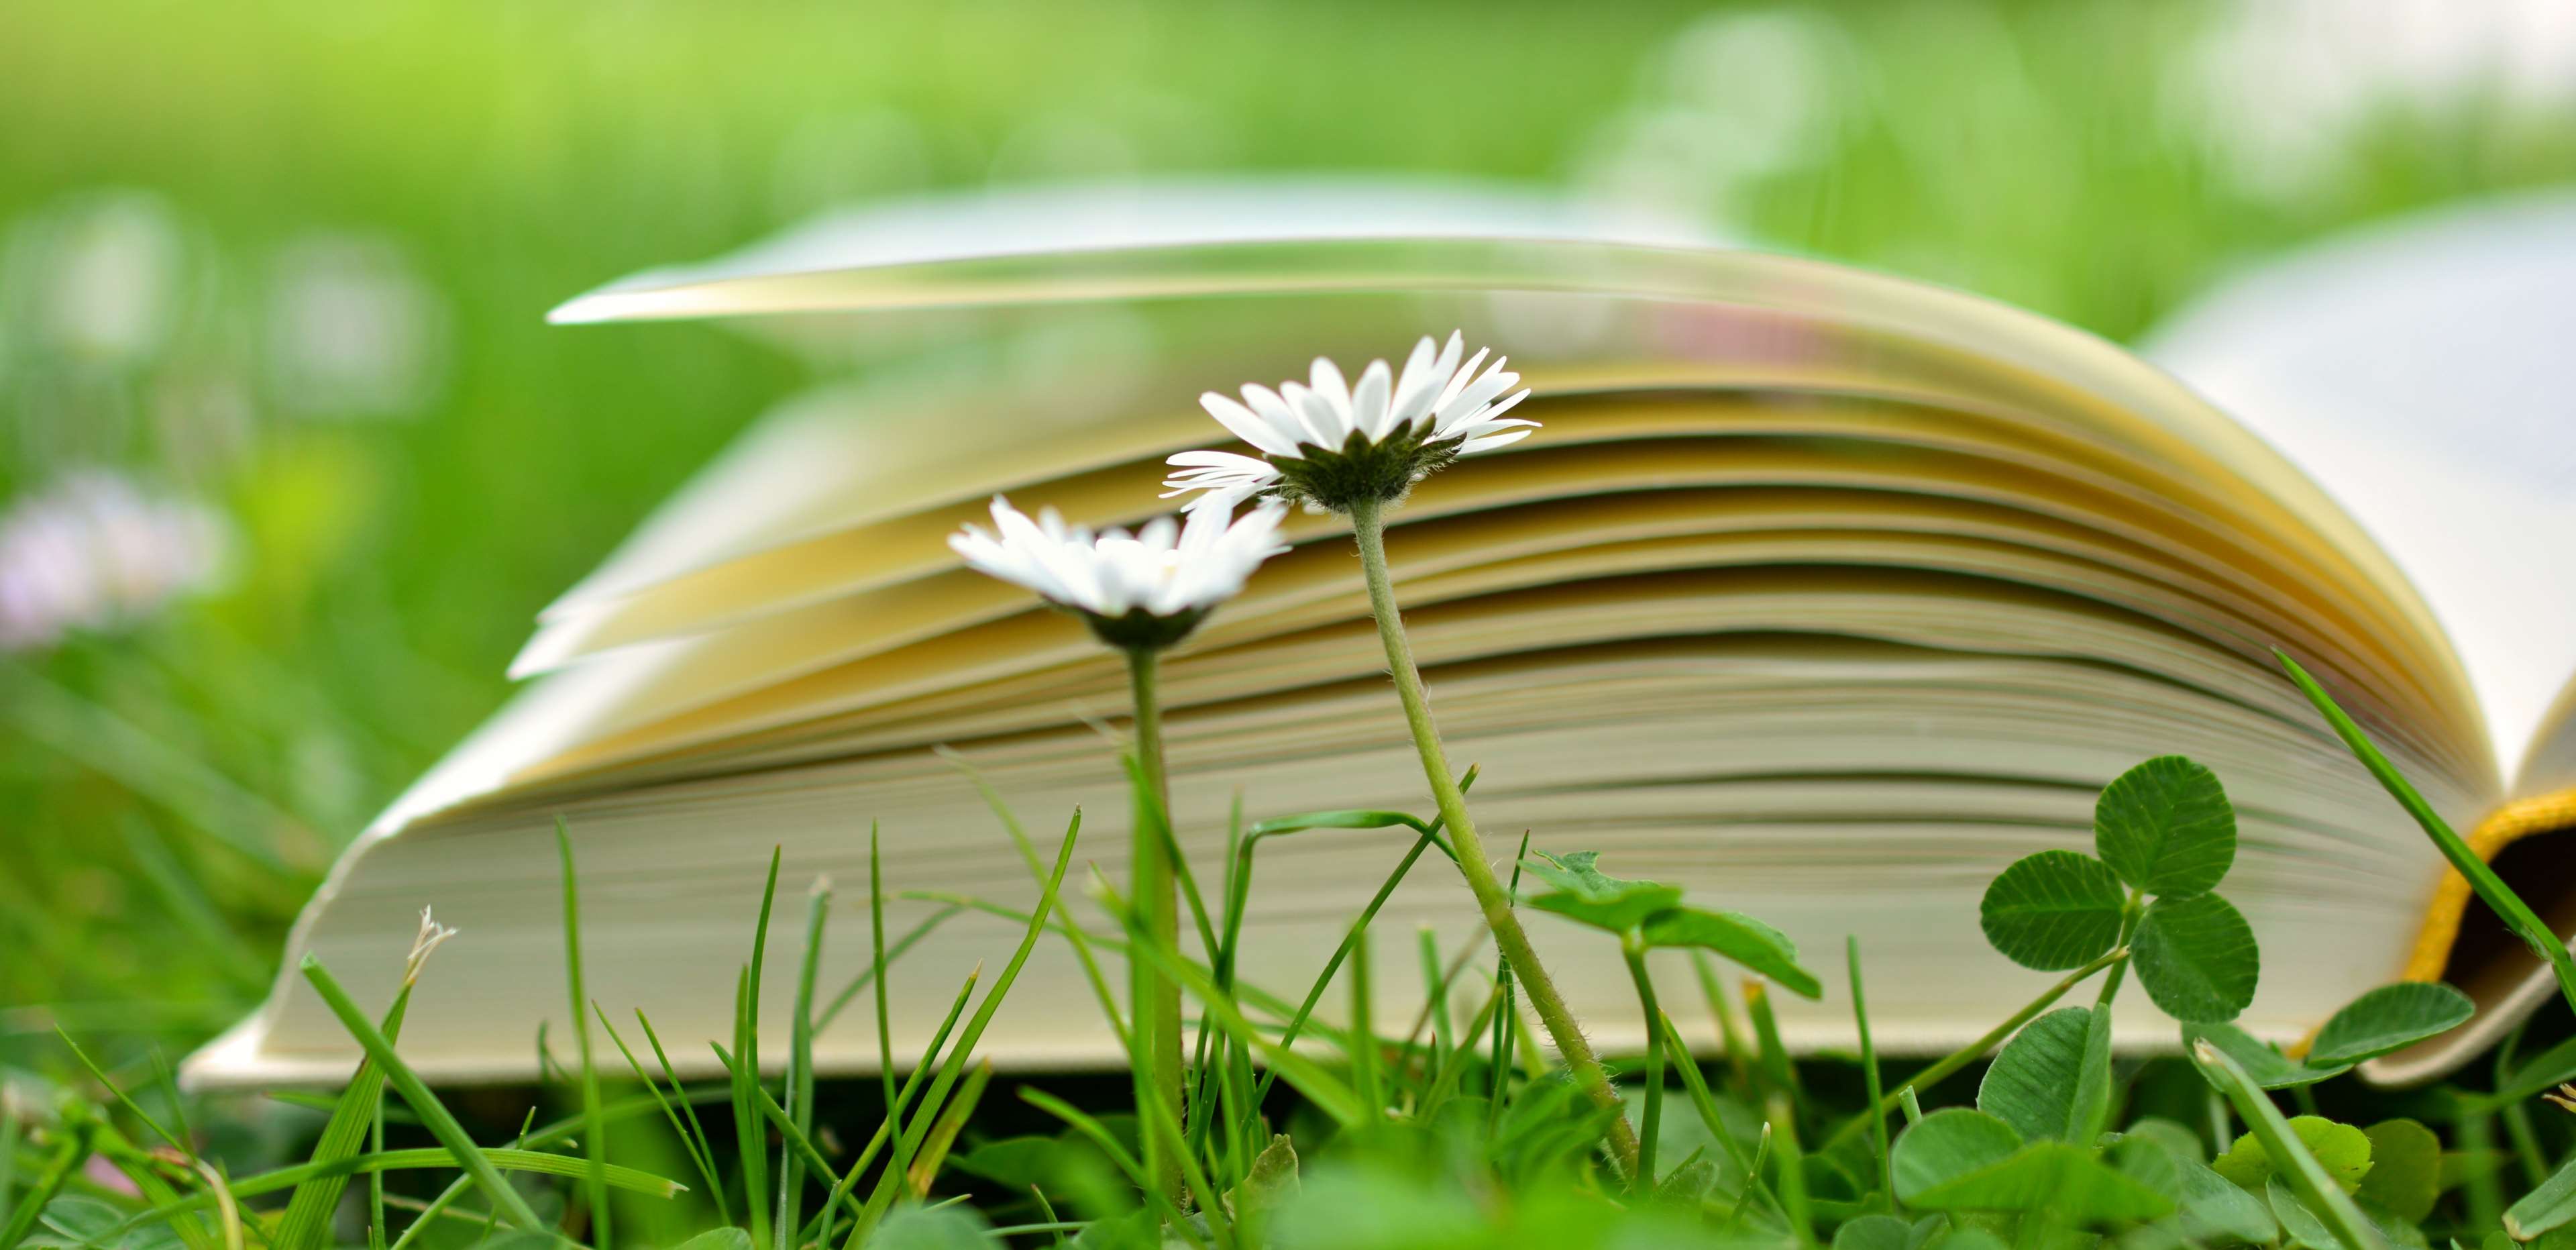 book, book pages, books, daisy, education, learn, literature, meadow, pages, pitched, read, relax, study 4k Gallery HD Wallpaper